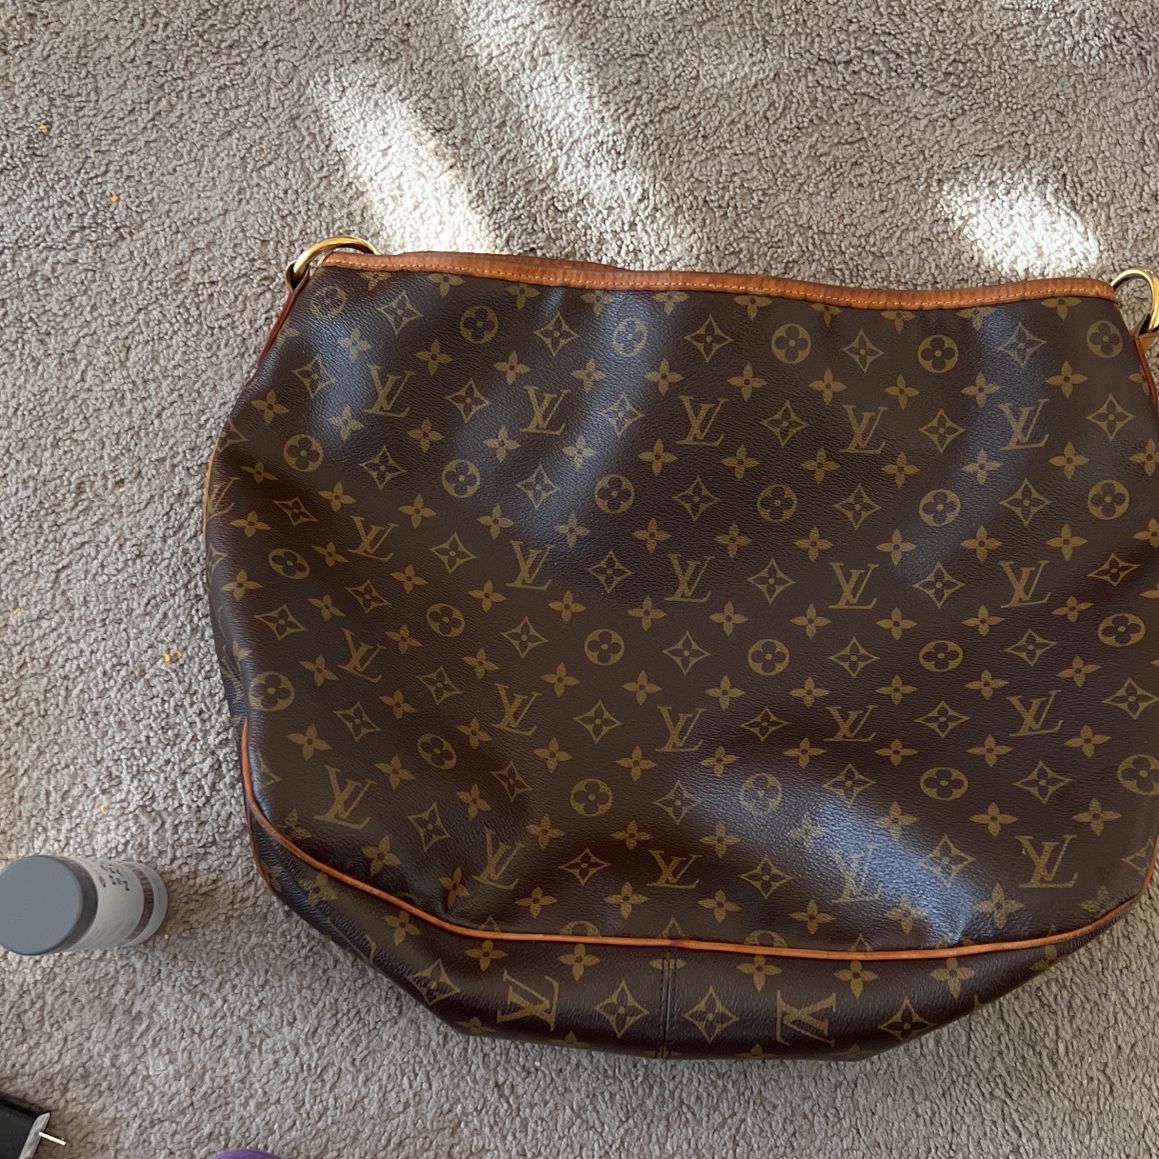 Dupe LV Purse For $140 In Avondale, AZ